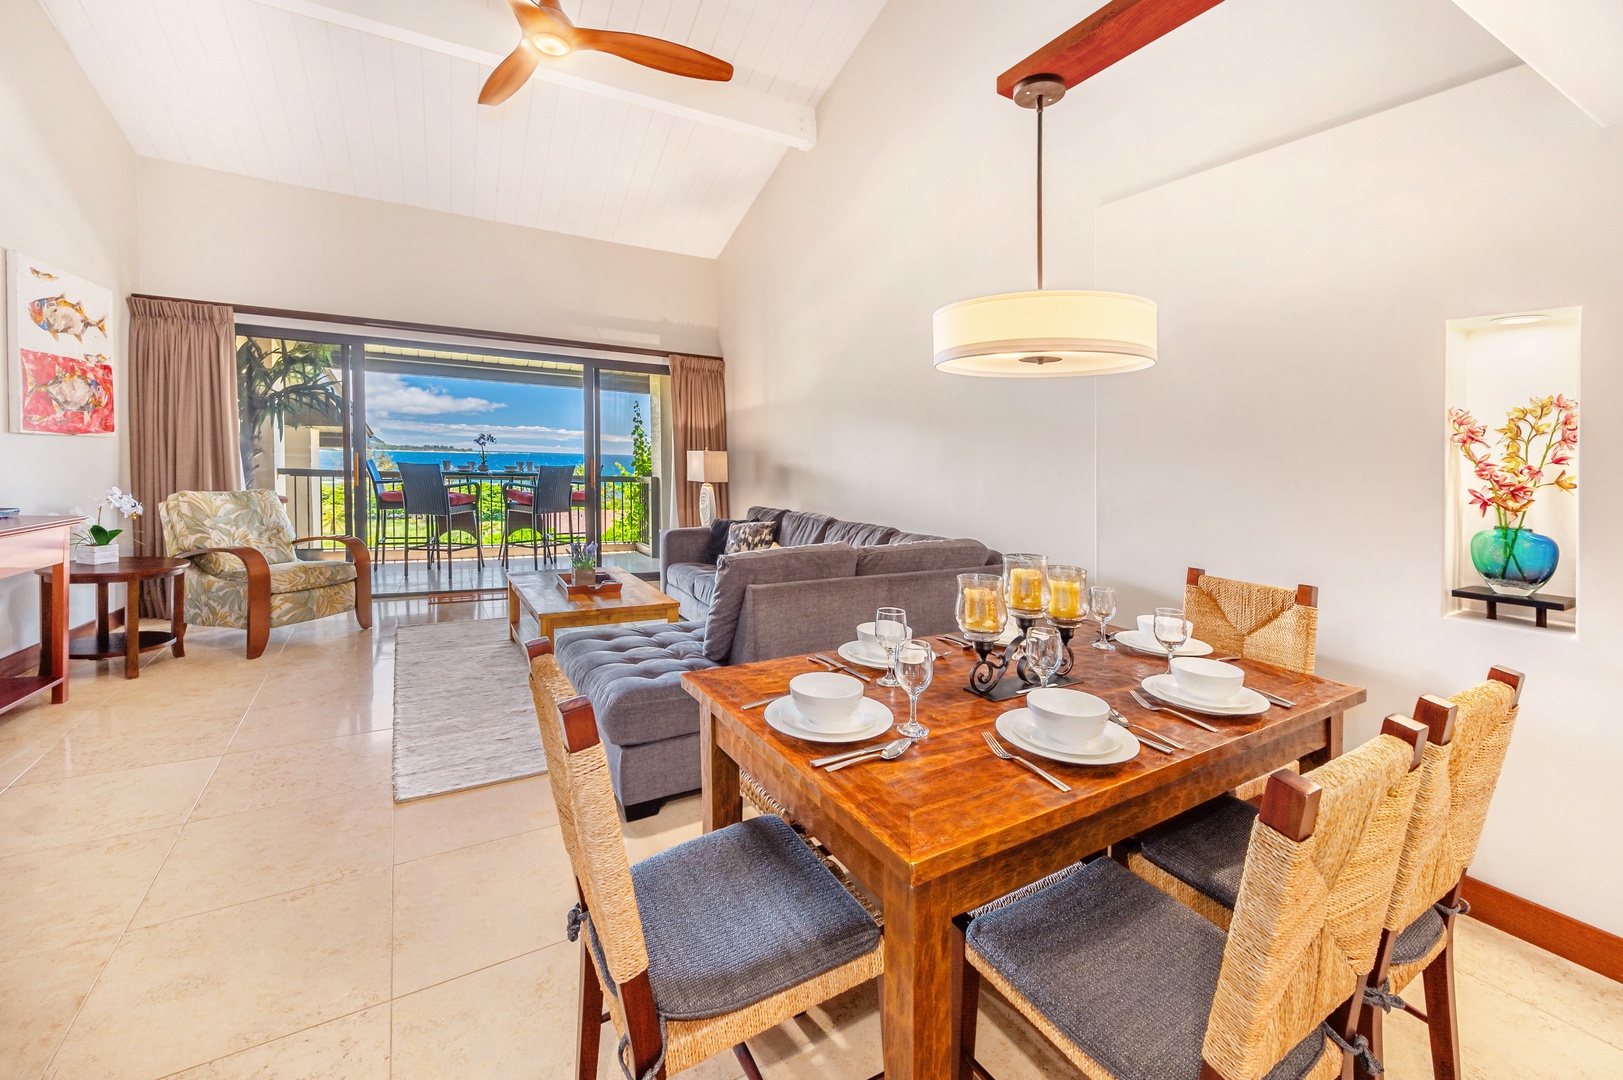 Princeville Vacation Rentals, Hanalei Bay Resort 7307/08 - Dining area sets up to 6 guests